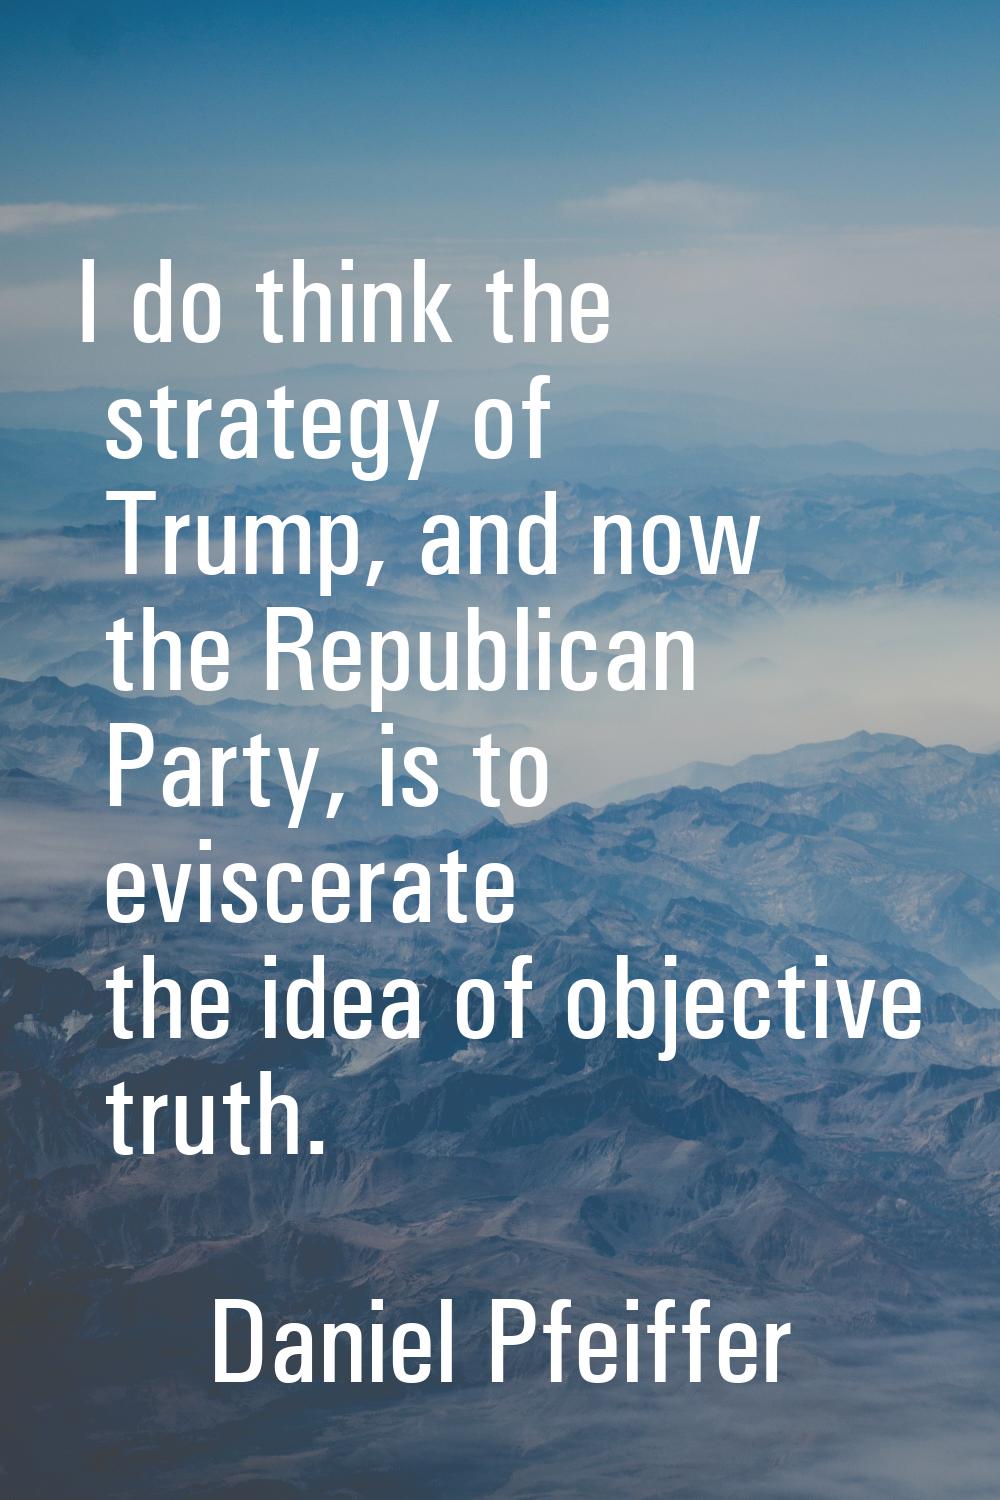 I do think the strategy of Trump, and now the Republican Party, is to eviscerate the idea of object